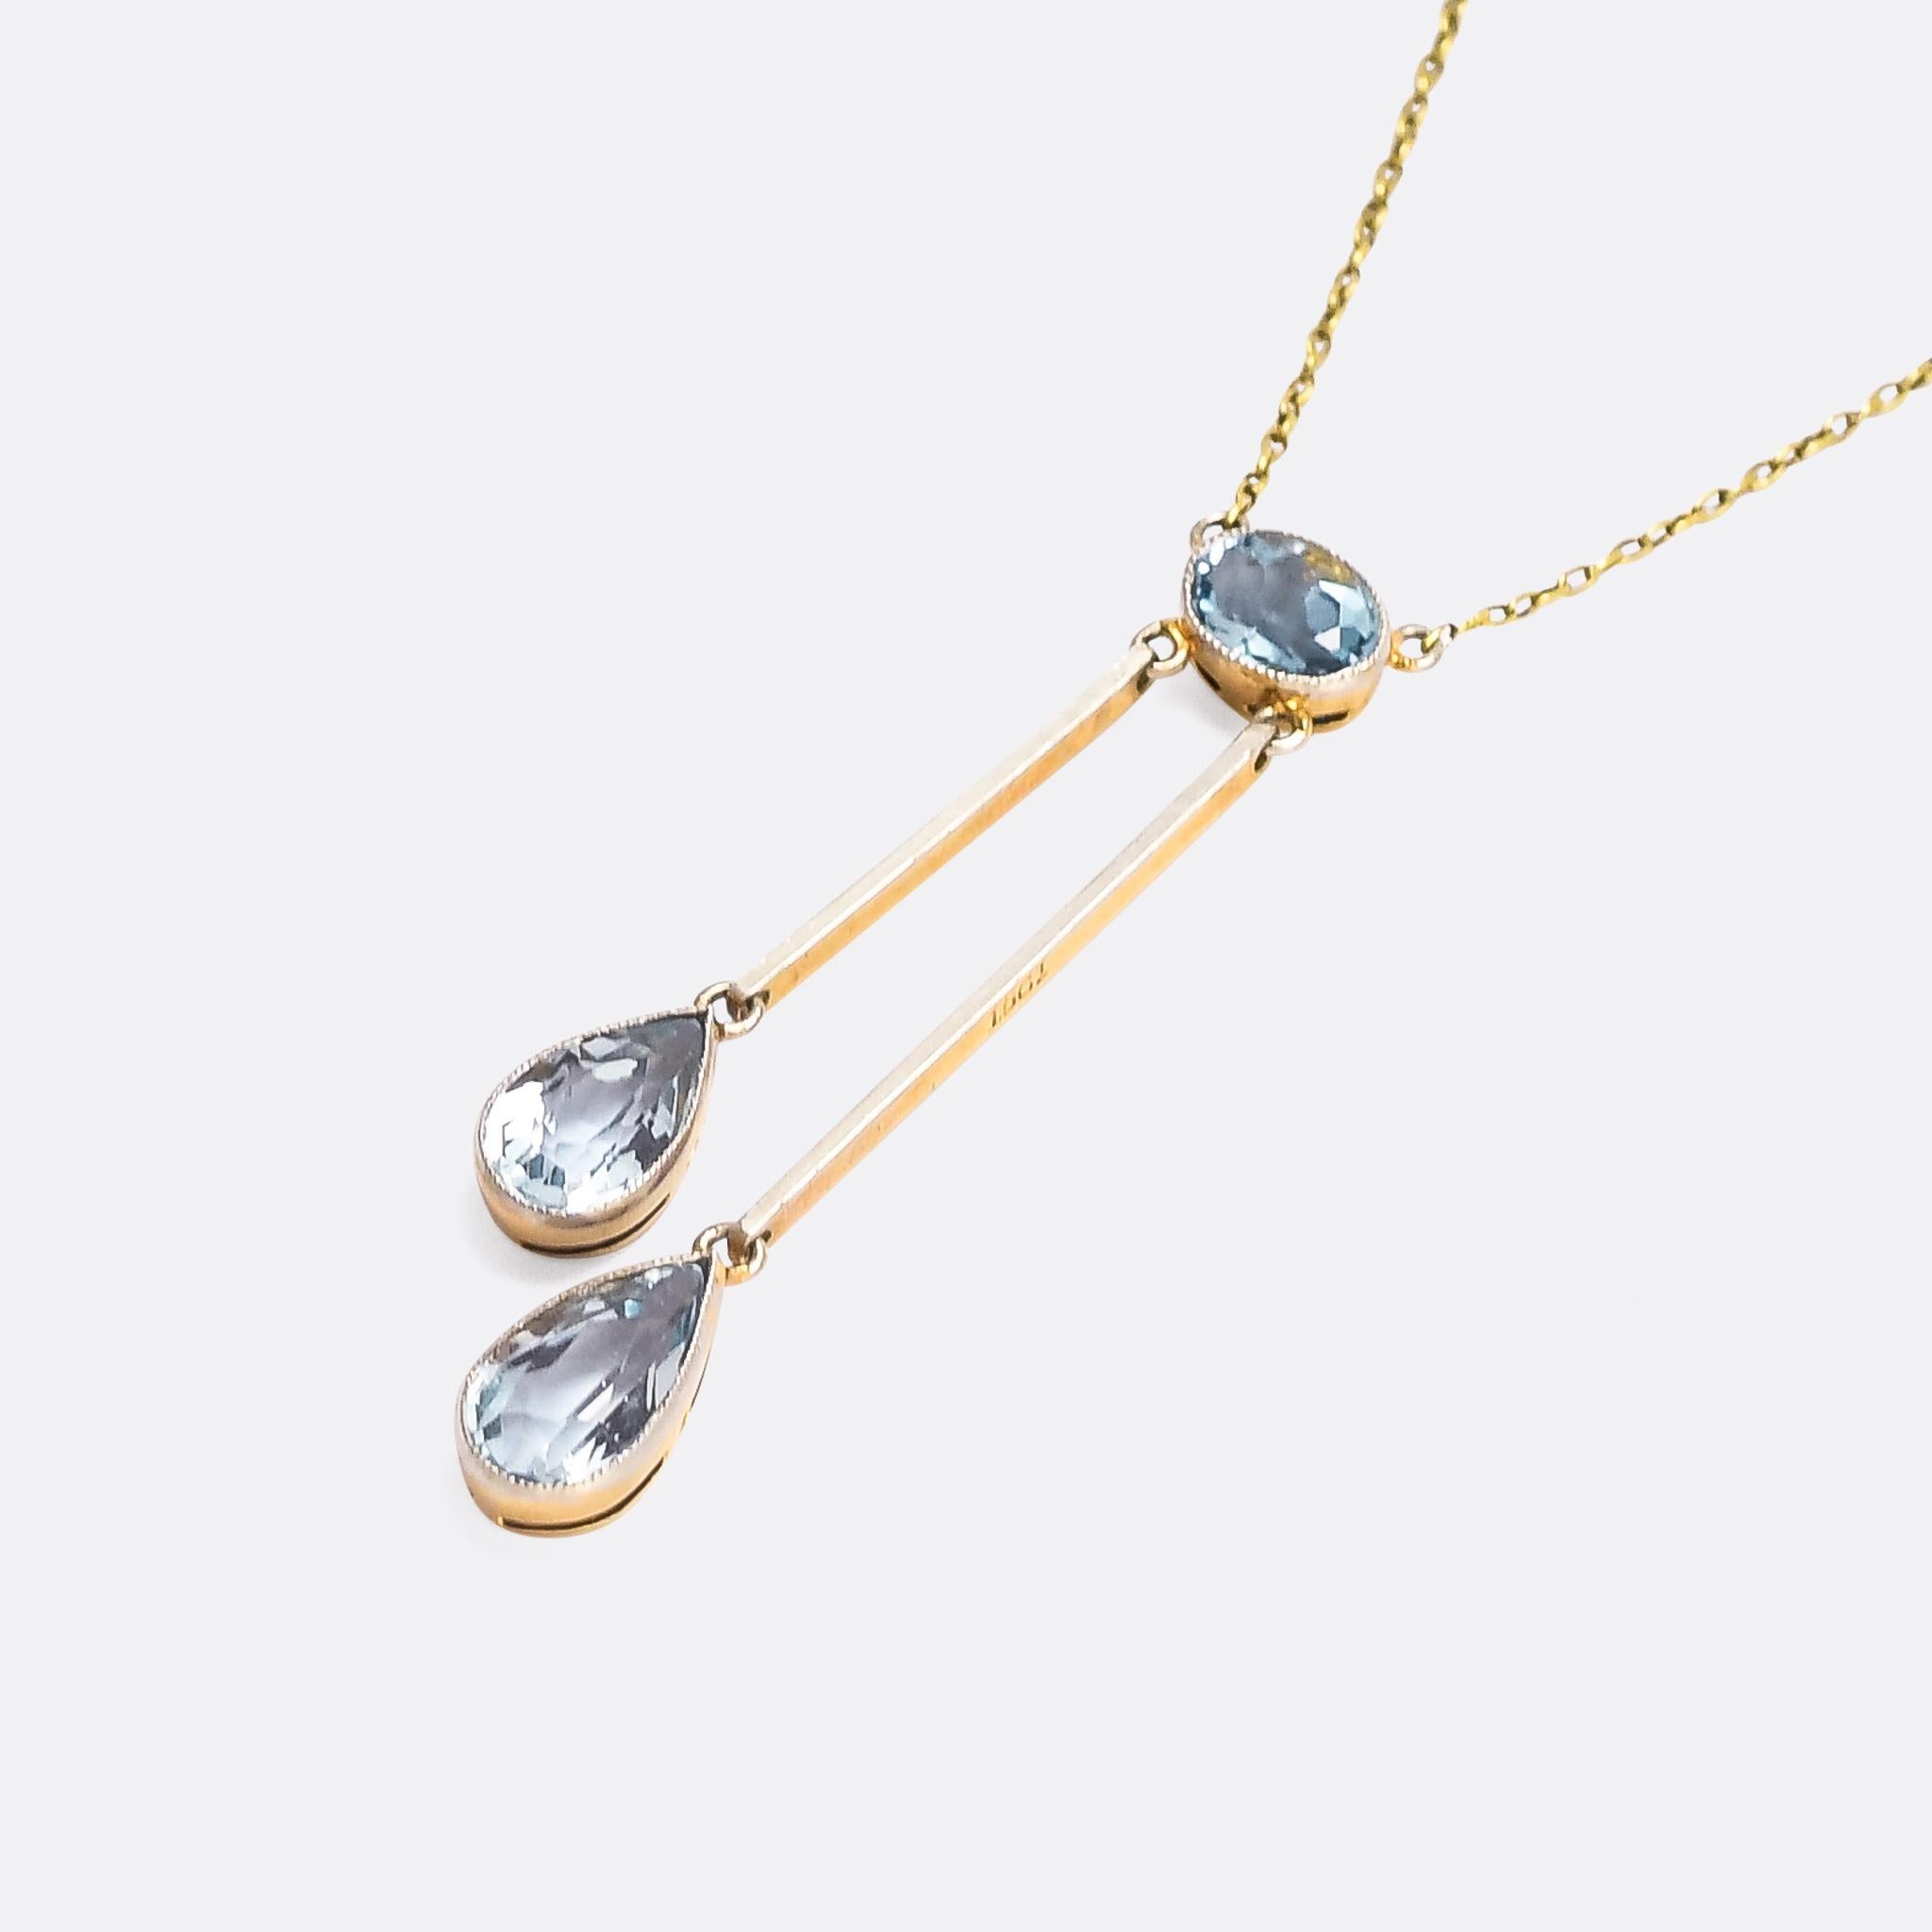 A stunning Edwardian negligee necklace set with three faceted aquamarines. The pendant consists of two pear cut drops of differing lengths dangling beneath an oval aquamarine top. It's crafted in 15k gold with millegrain platinum settings. A